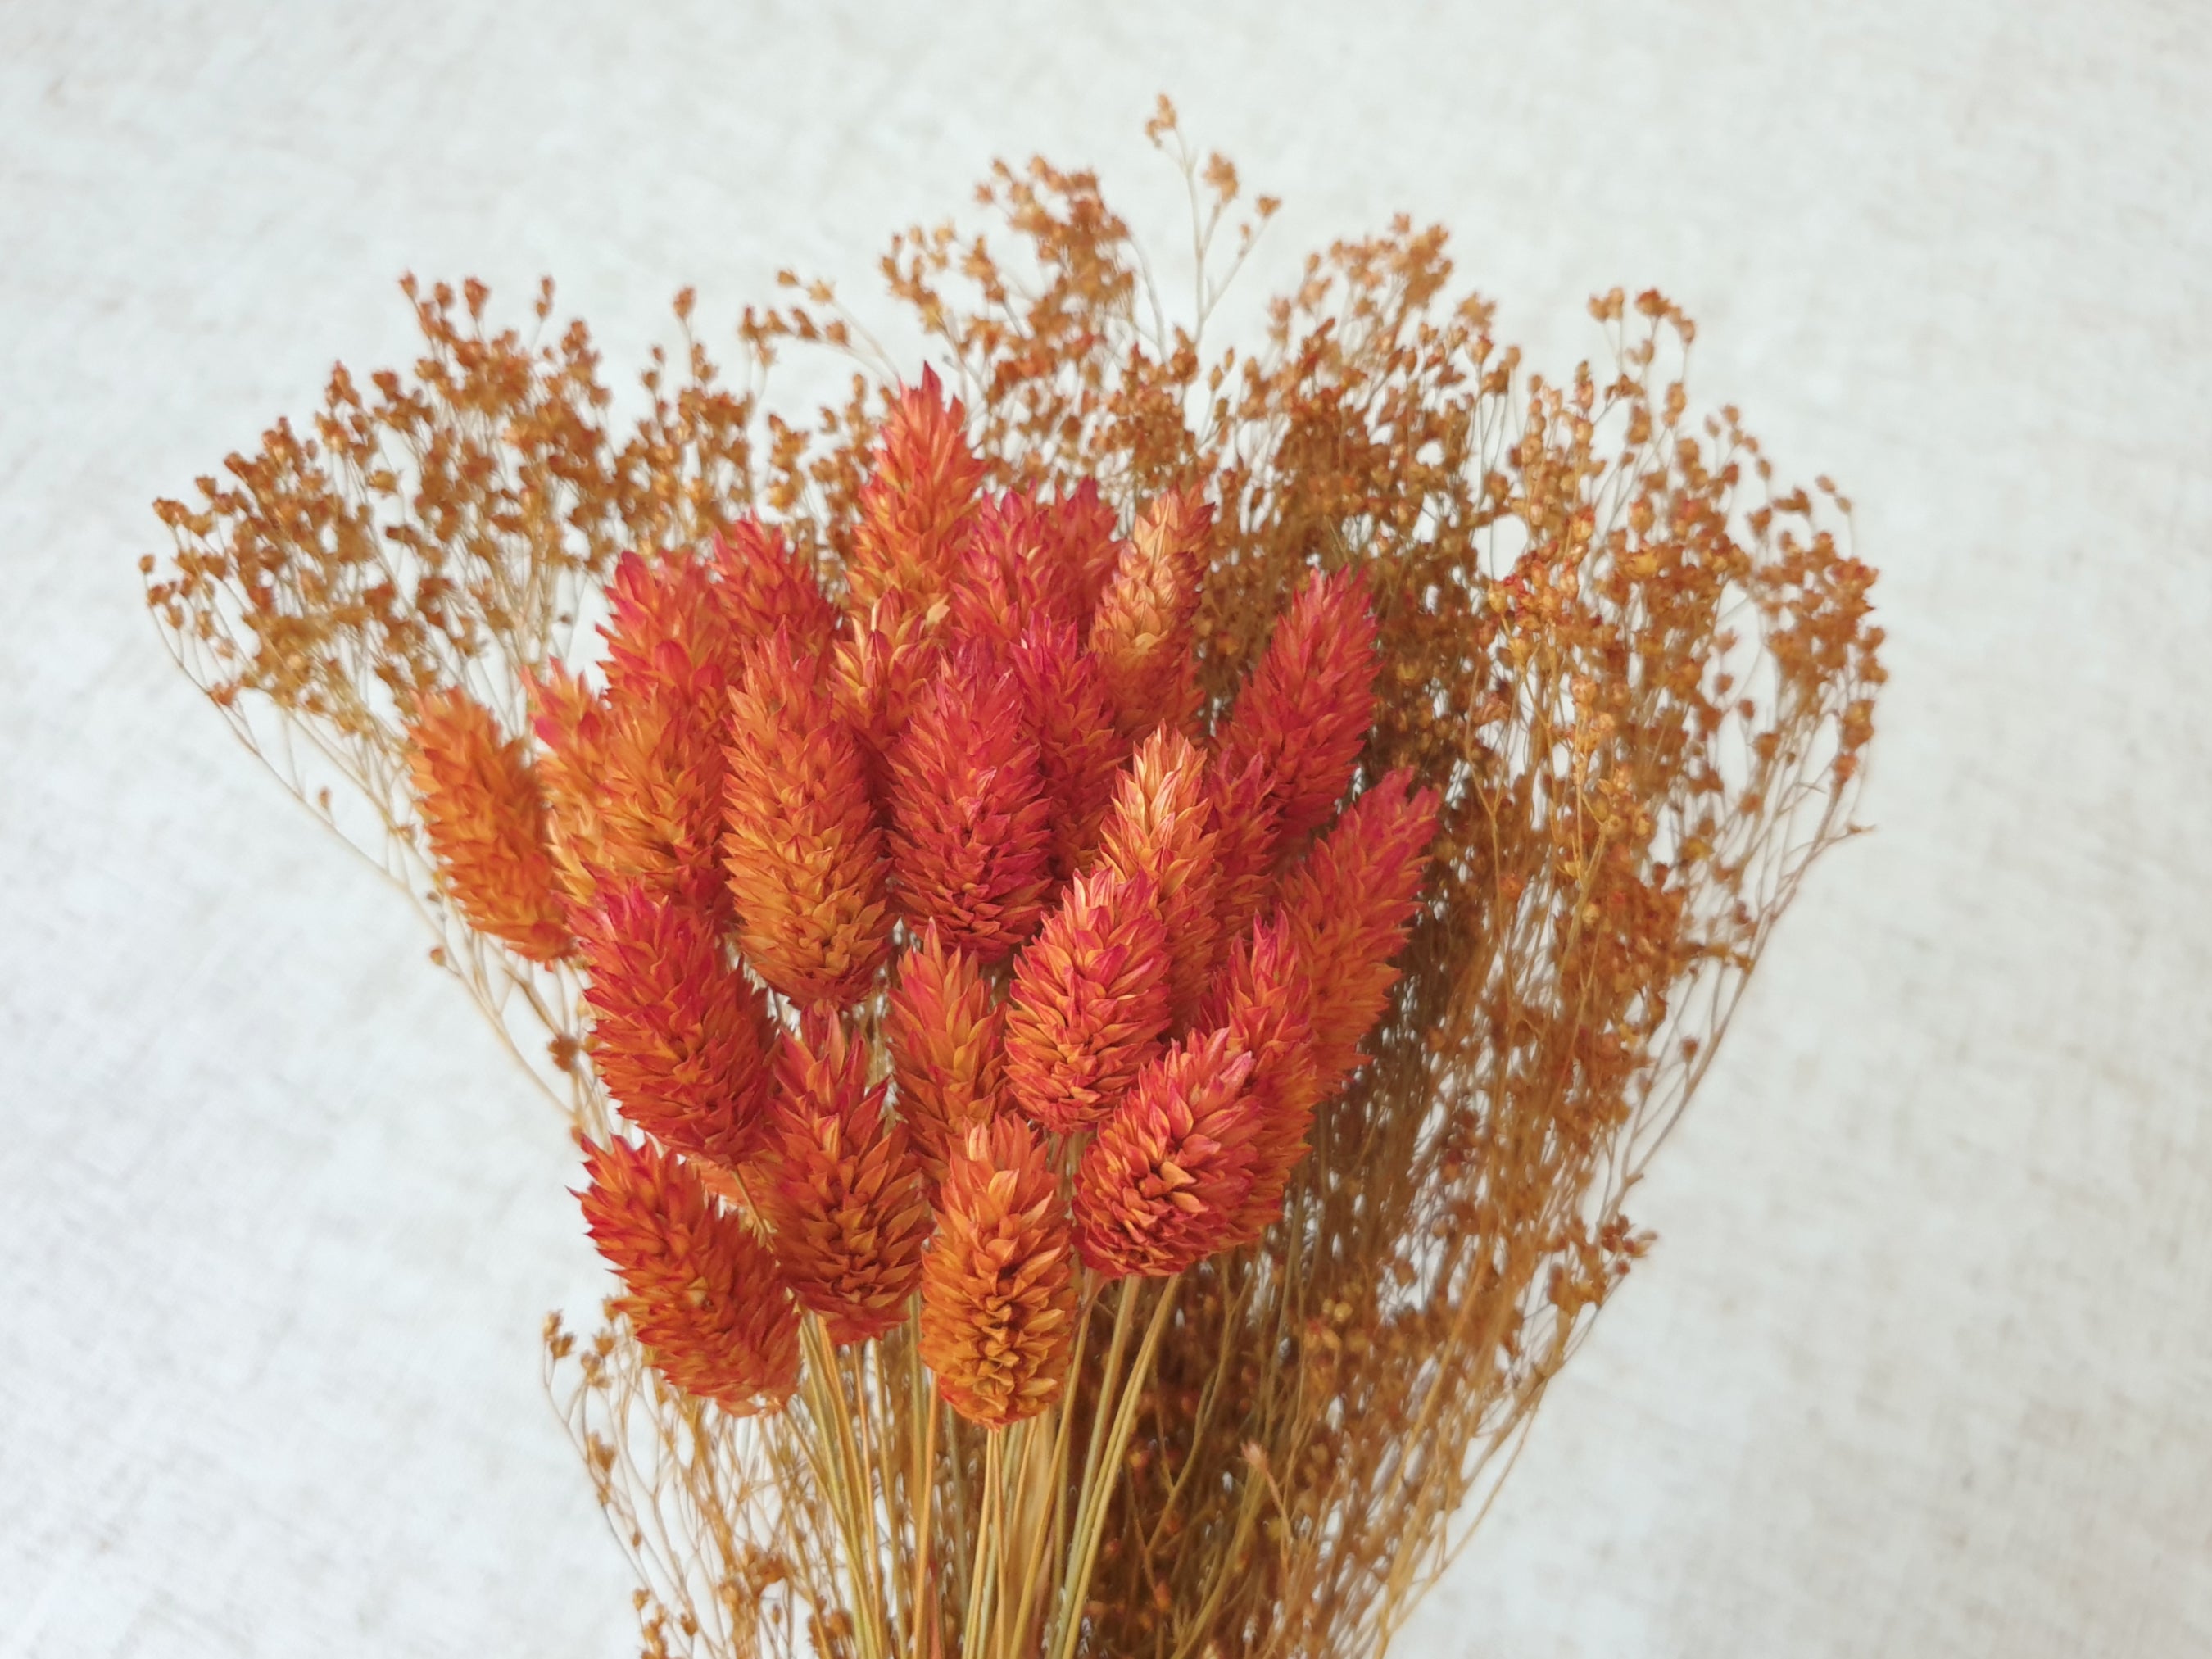 Assortment of White dried flowers - Dried Broom Bloom, Dried